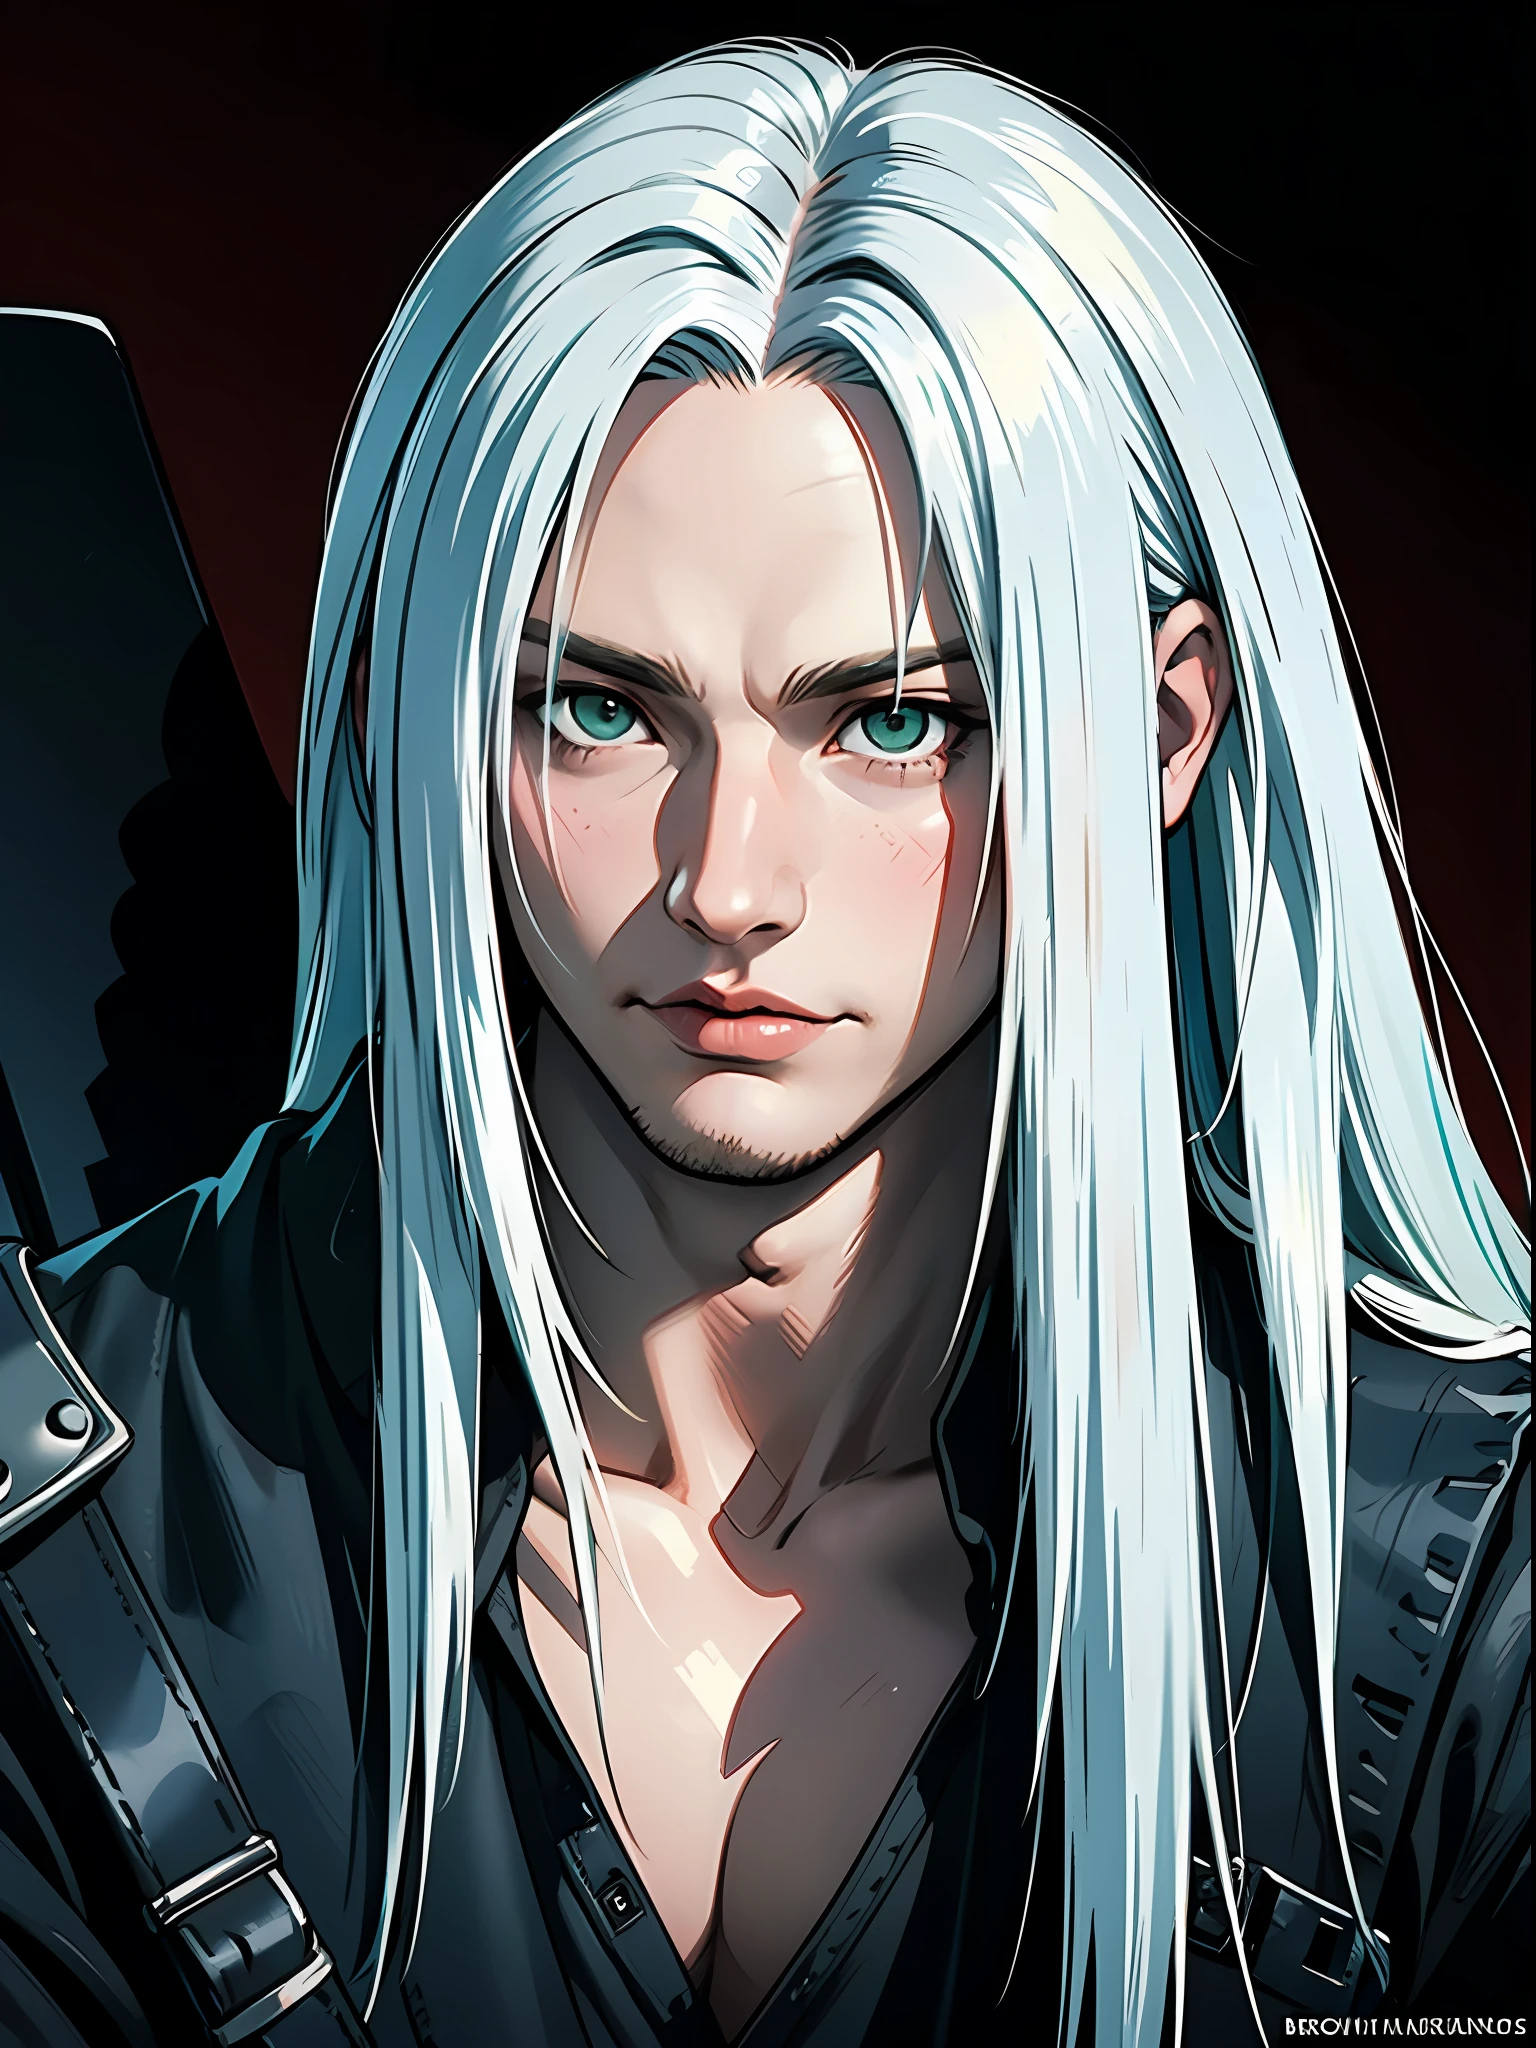 (masterpiece), best quality, Sephiroth, Sephiroth (Final Fantasy), green eyes, masculine detailed hair detailed face, 1 man, man only, solo, full-body portrait, narrow perspective, perfect masculine face, toned abs, very charming man, attractive, muscular, mysterious